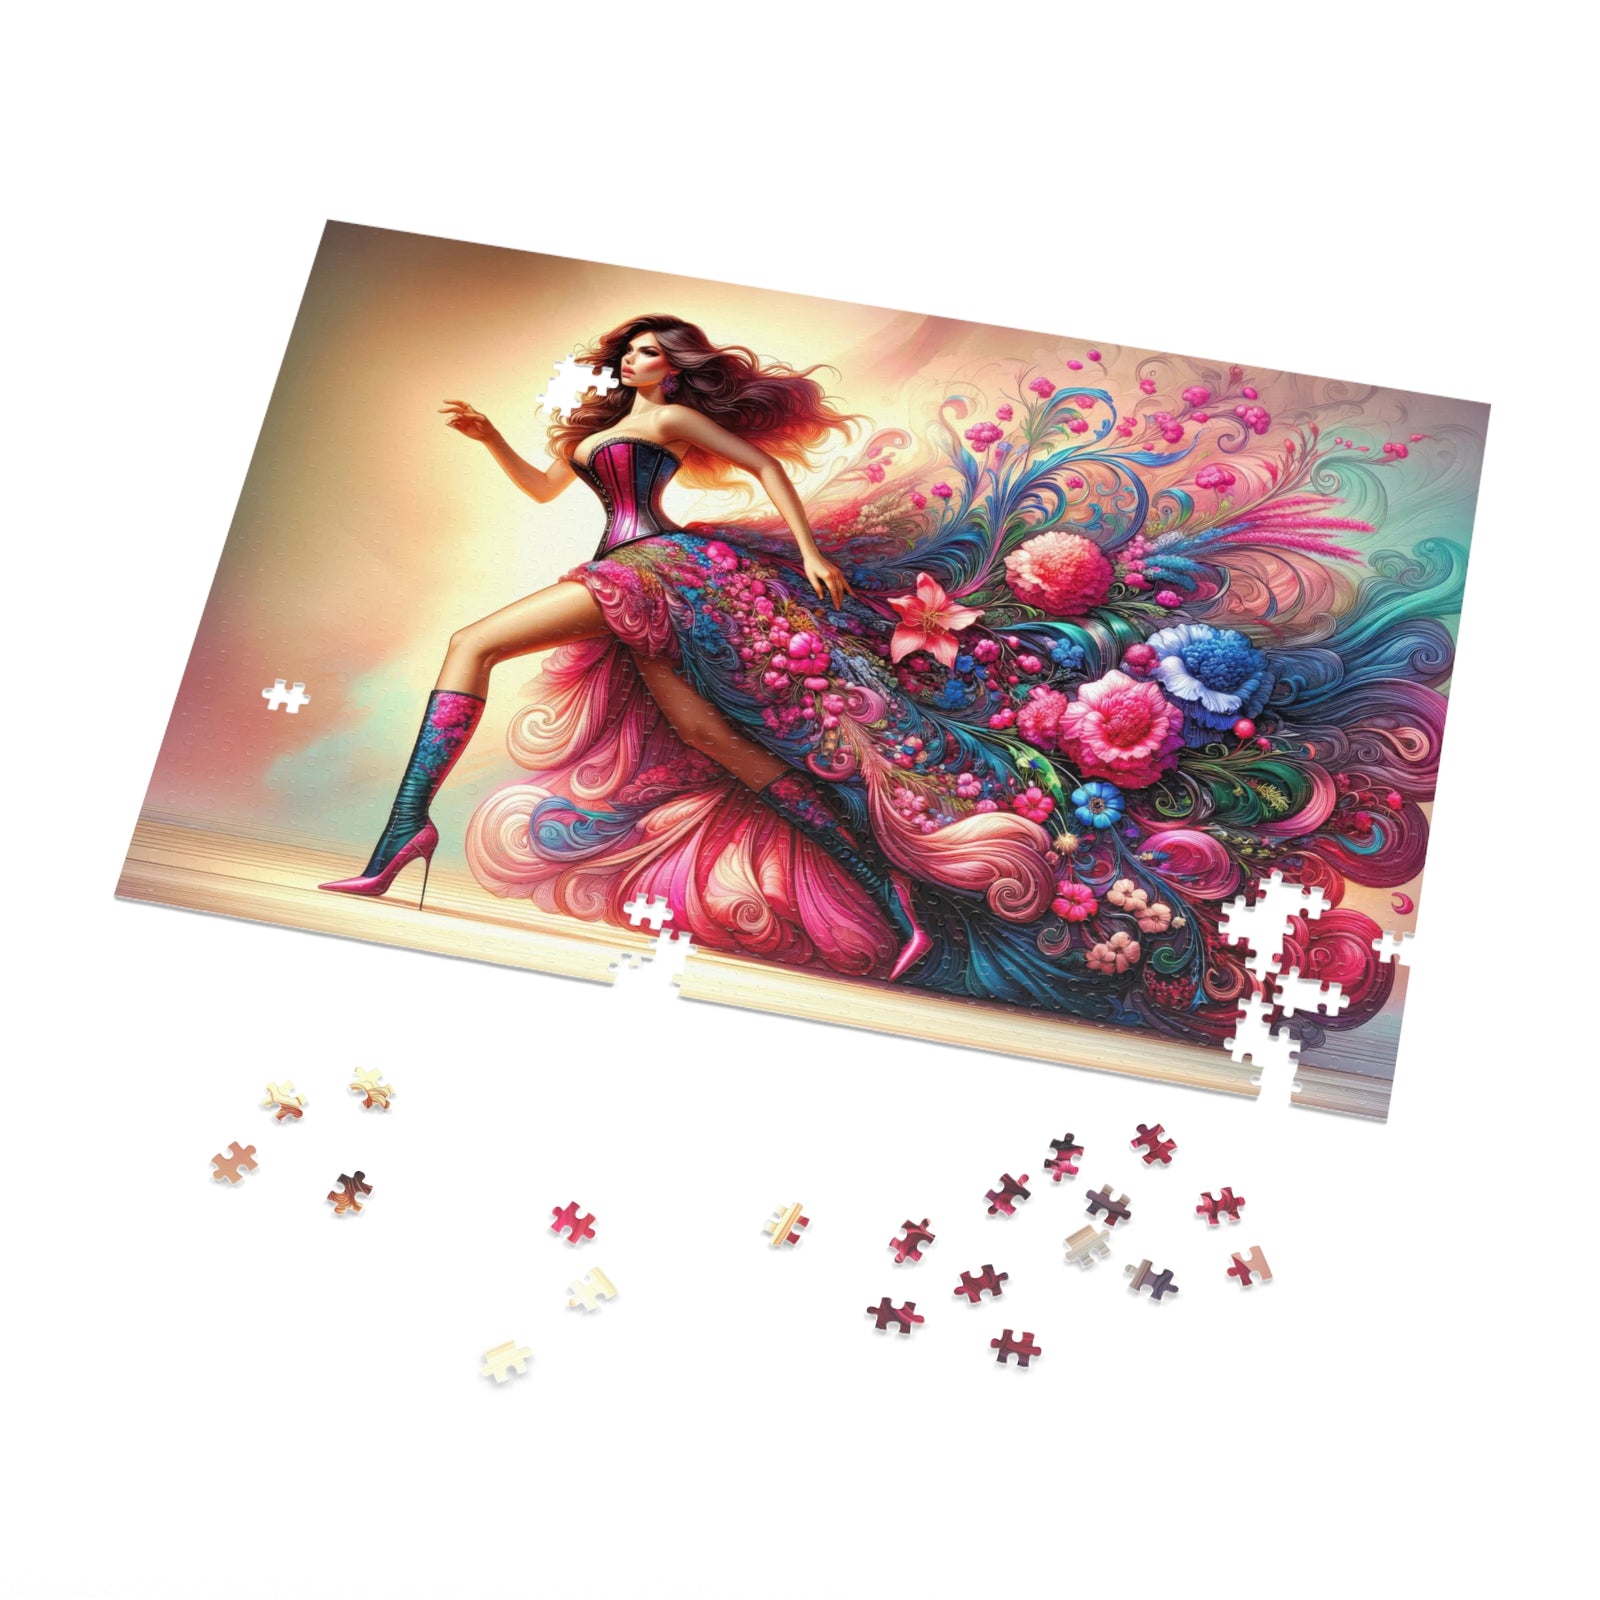 Floral Elegance in Motion Jigsaw Puzzle